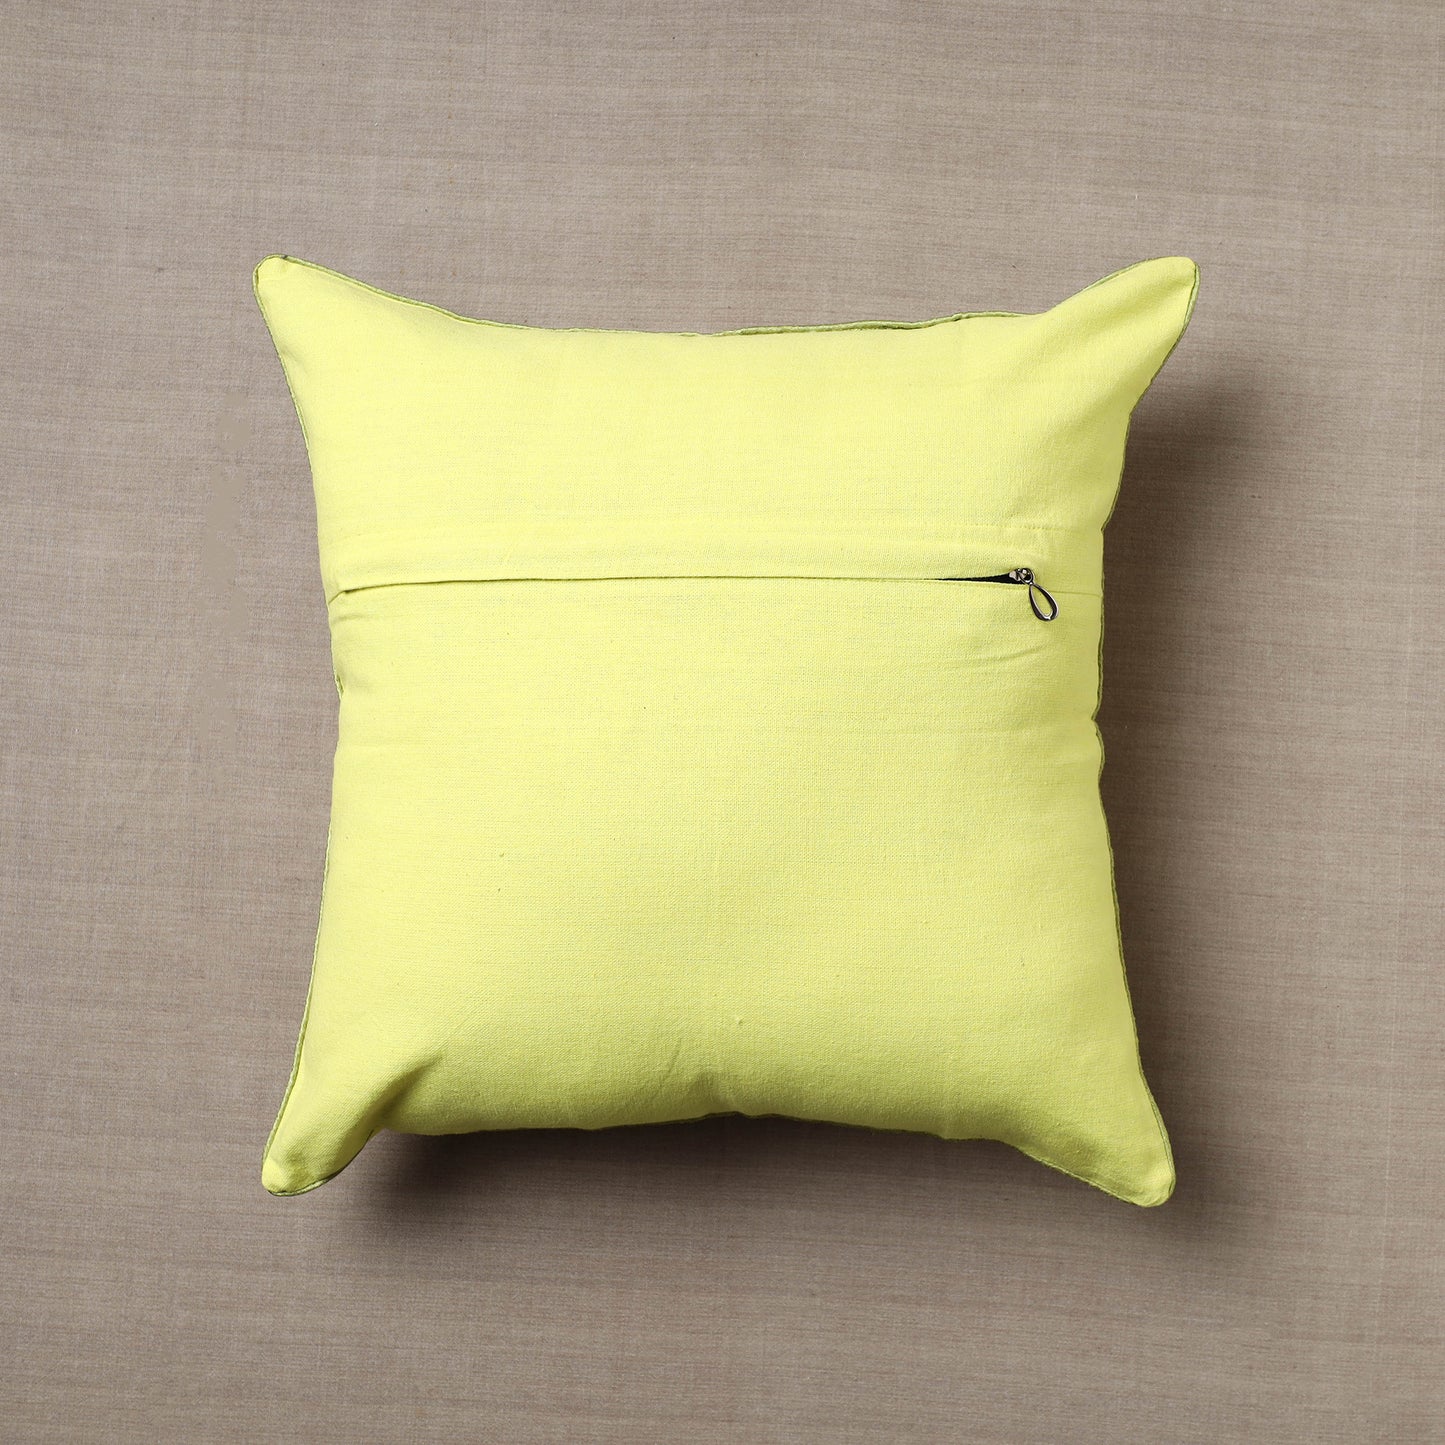 Green - Soof Embroidery Cotton Cushion Cover (16 x 16 in)